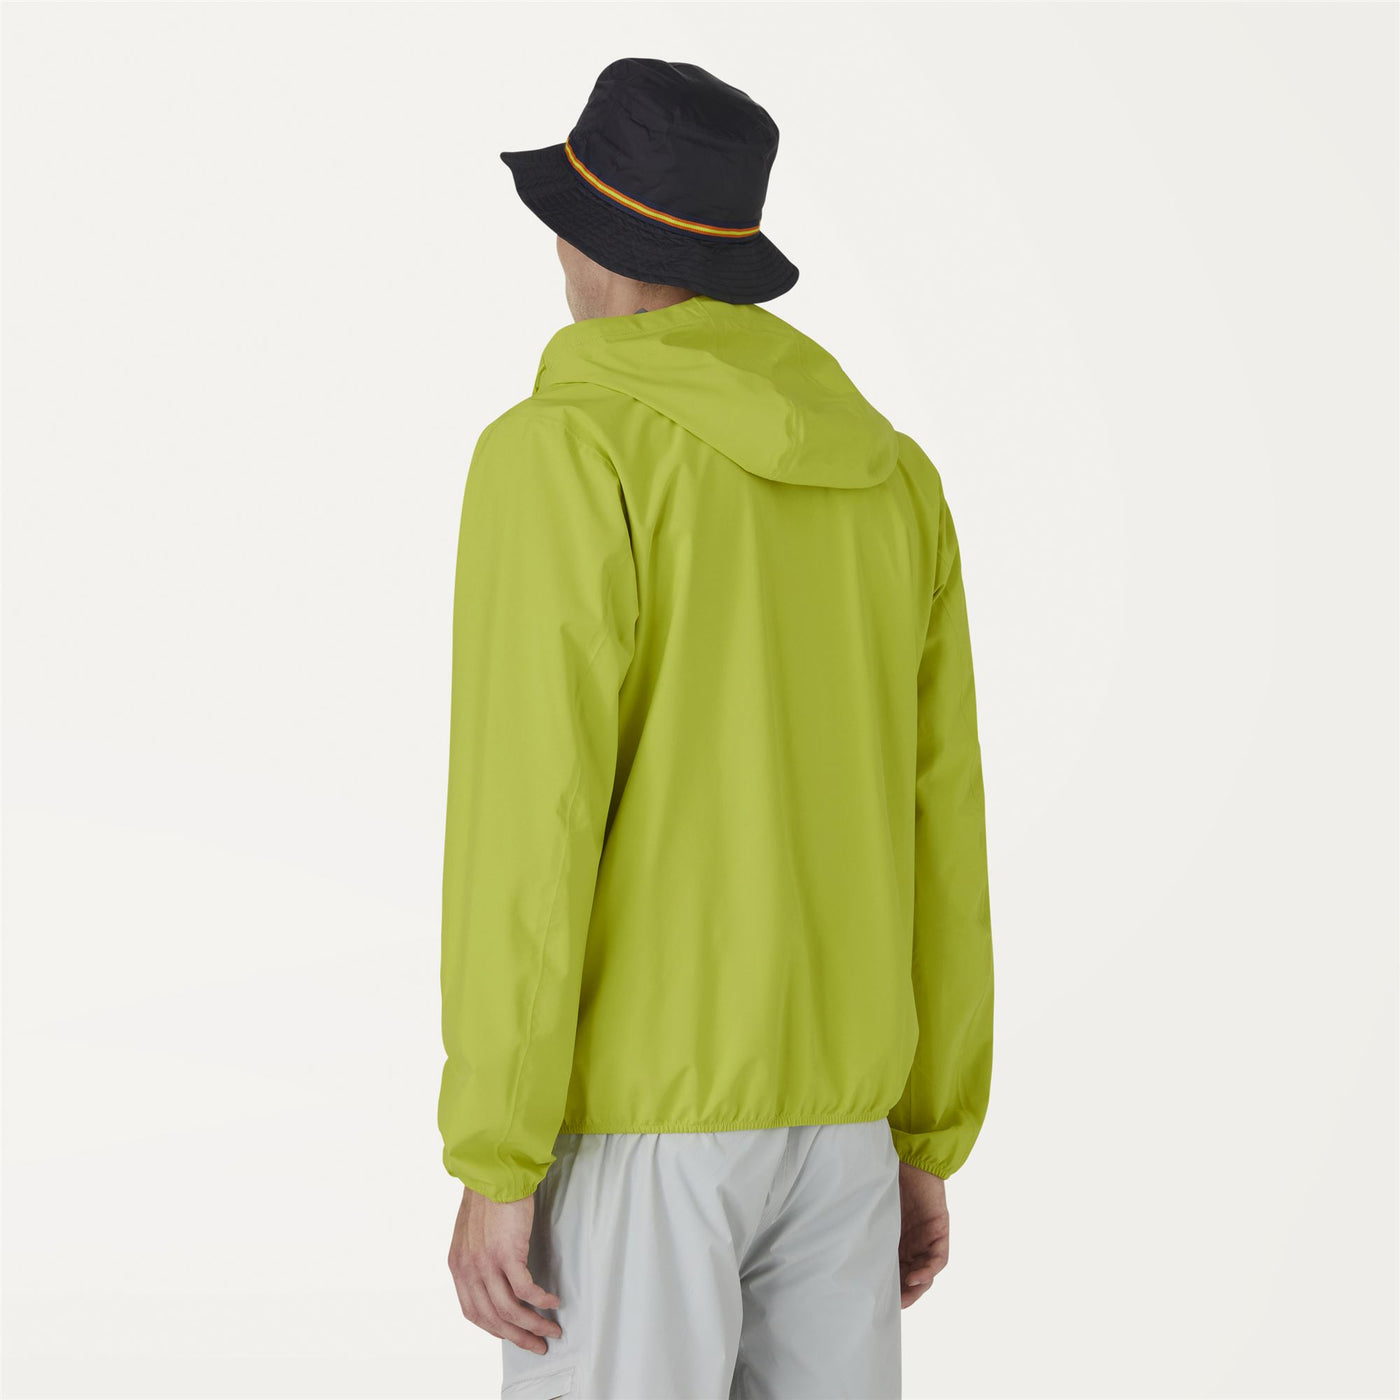 Jackets Man JACQUES STRETCH DOT Short GREEN LIME Dressed Front Double		